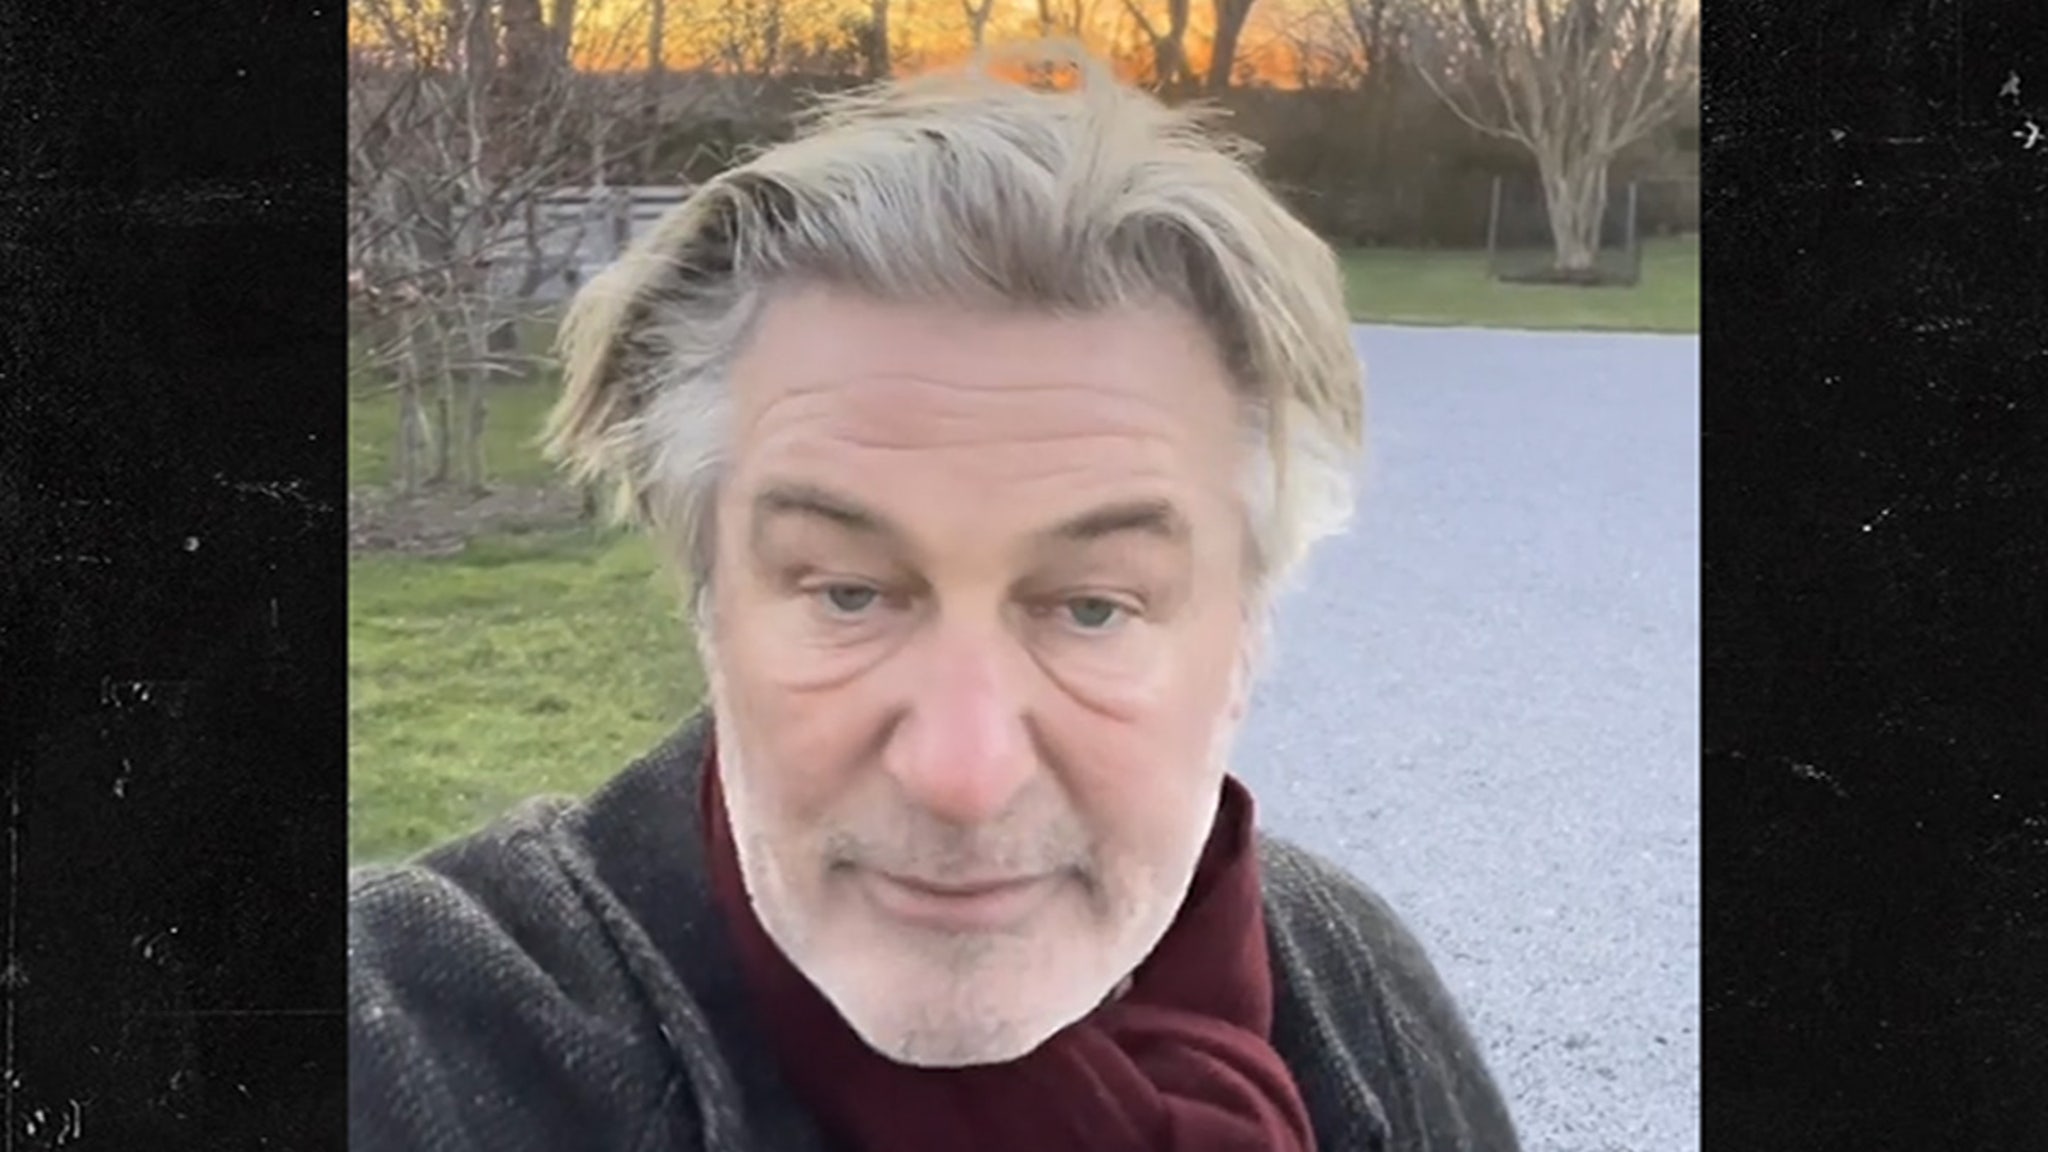 | Alec Baldwin Thanks People for Supporting Him After "Rust" Shooting | The Paradise